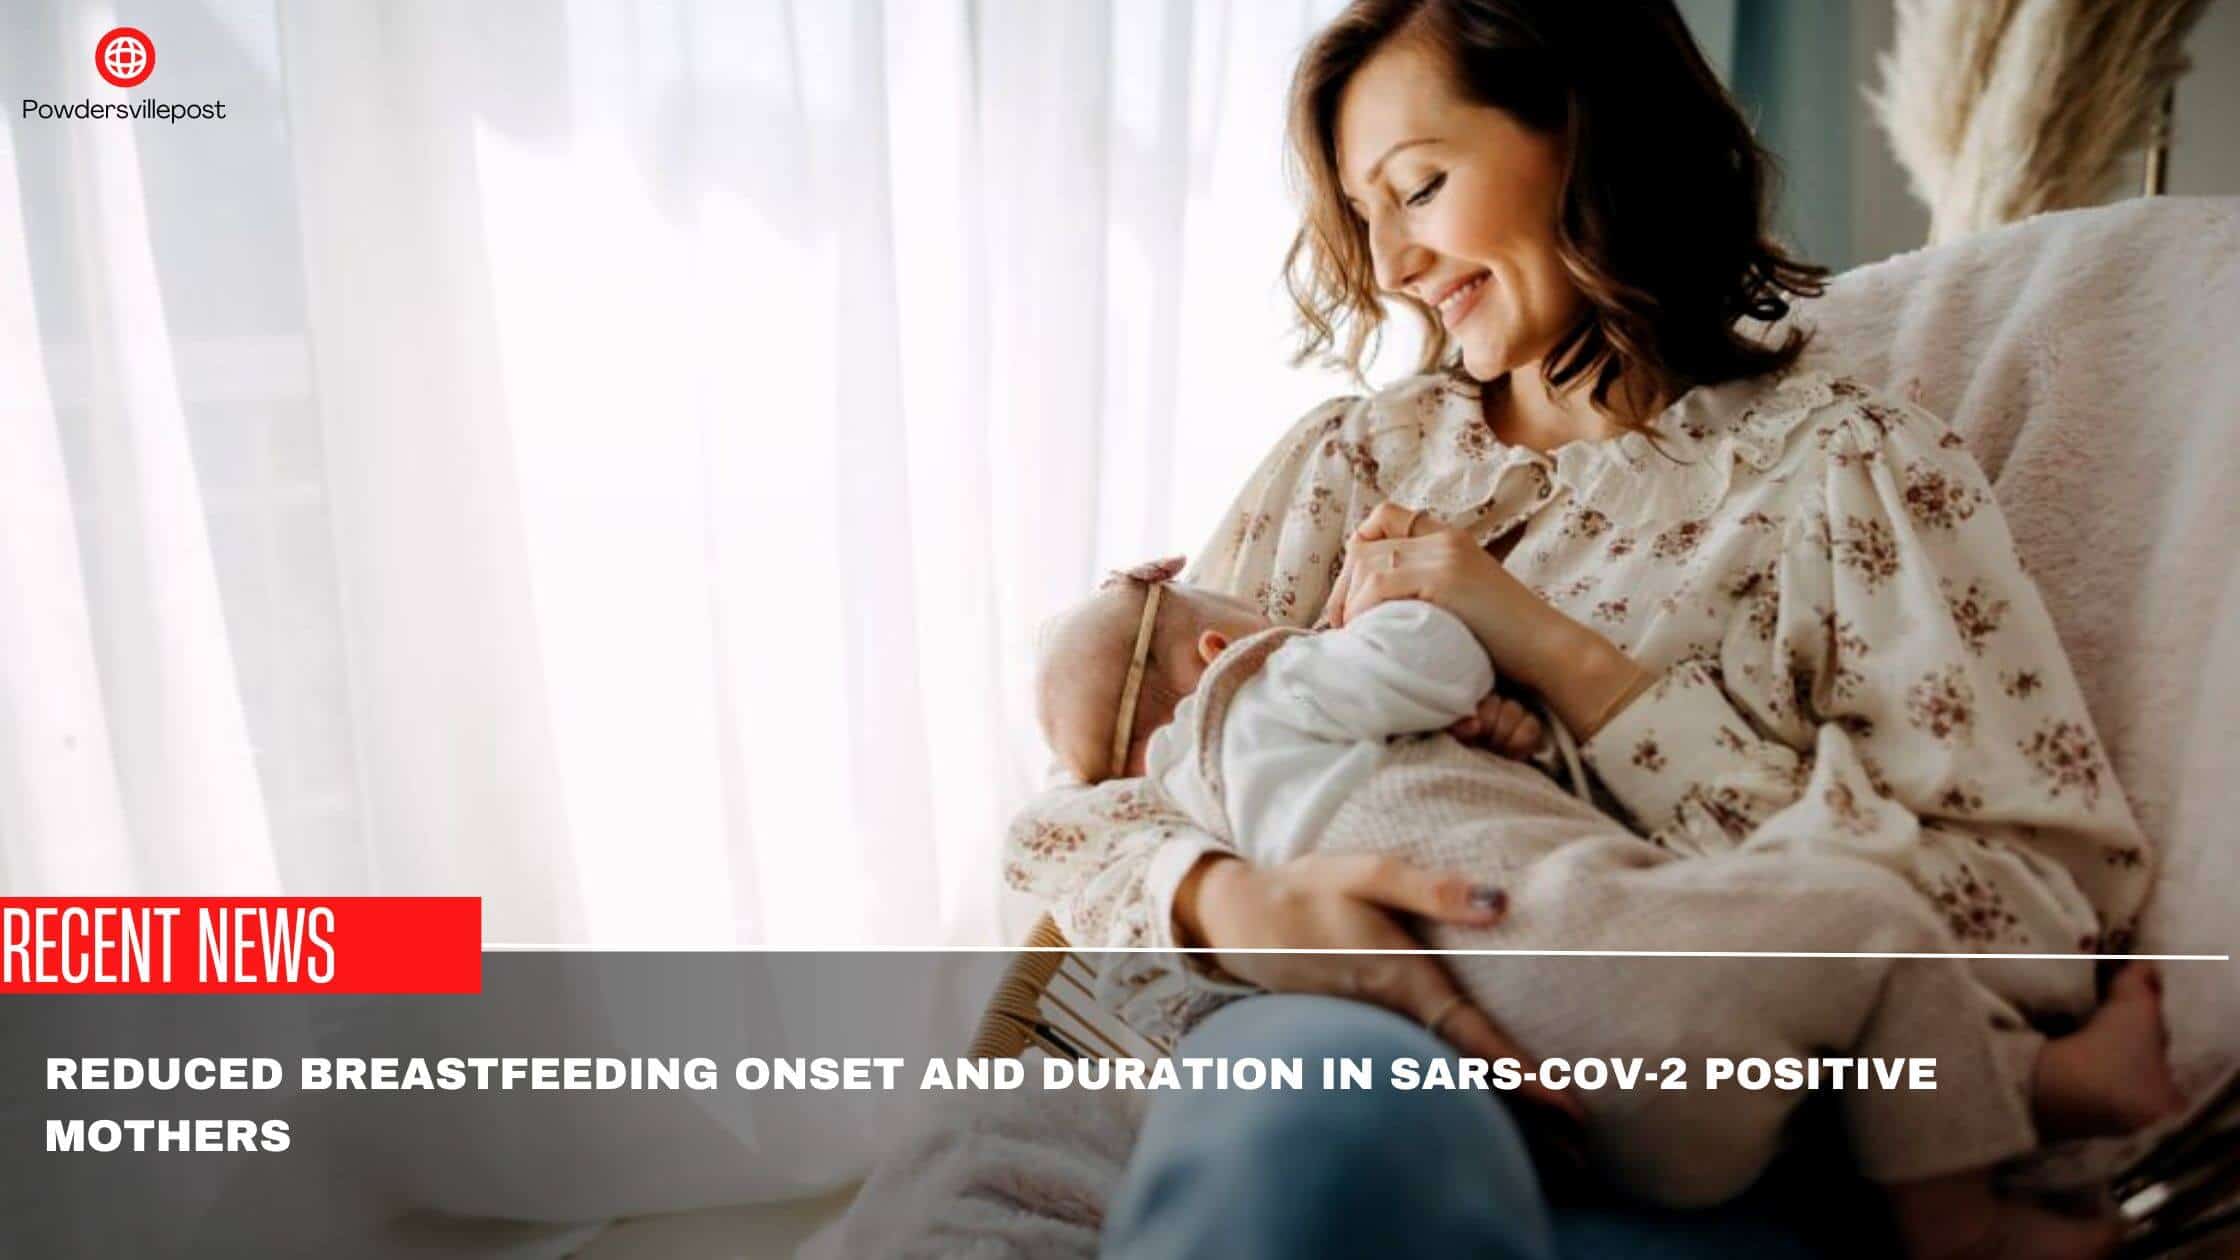 Reduced Breastfeeding Onset And Duration In Sars-Cov-2 Positive Mothers